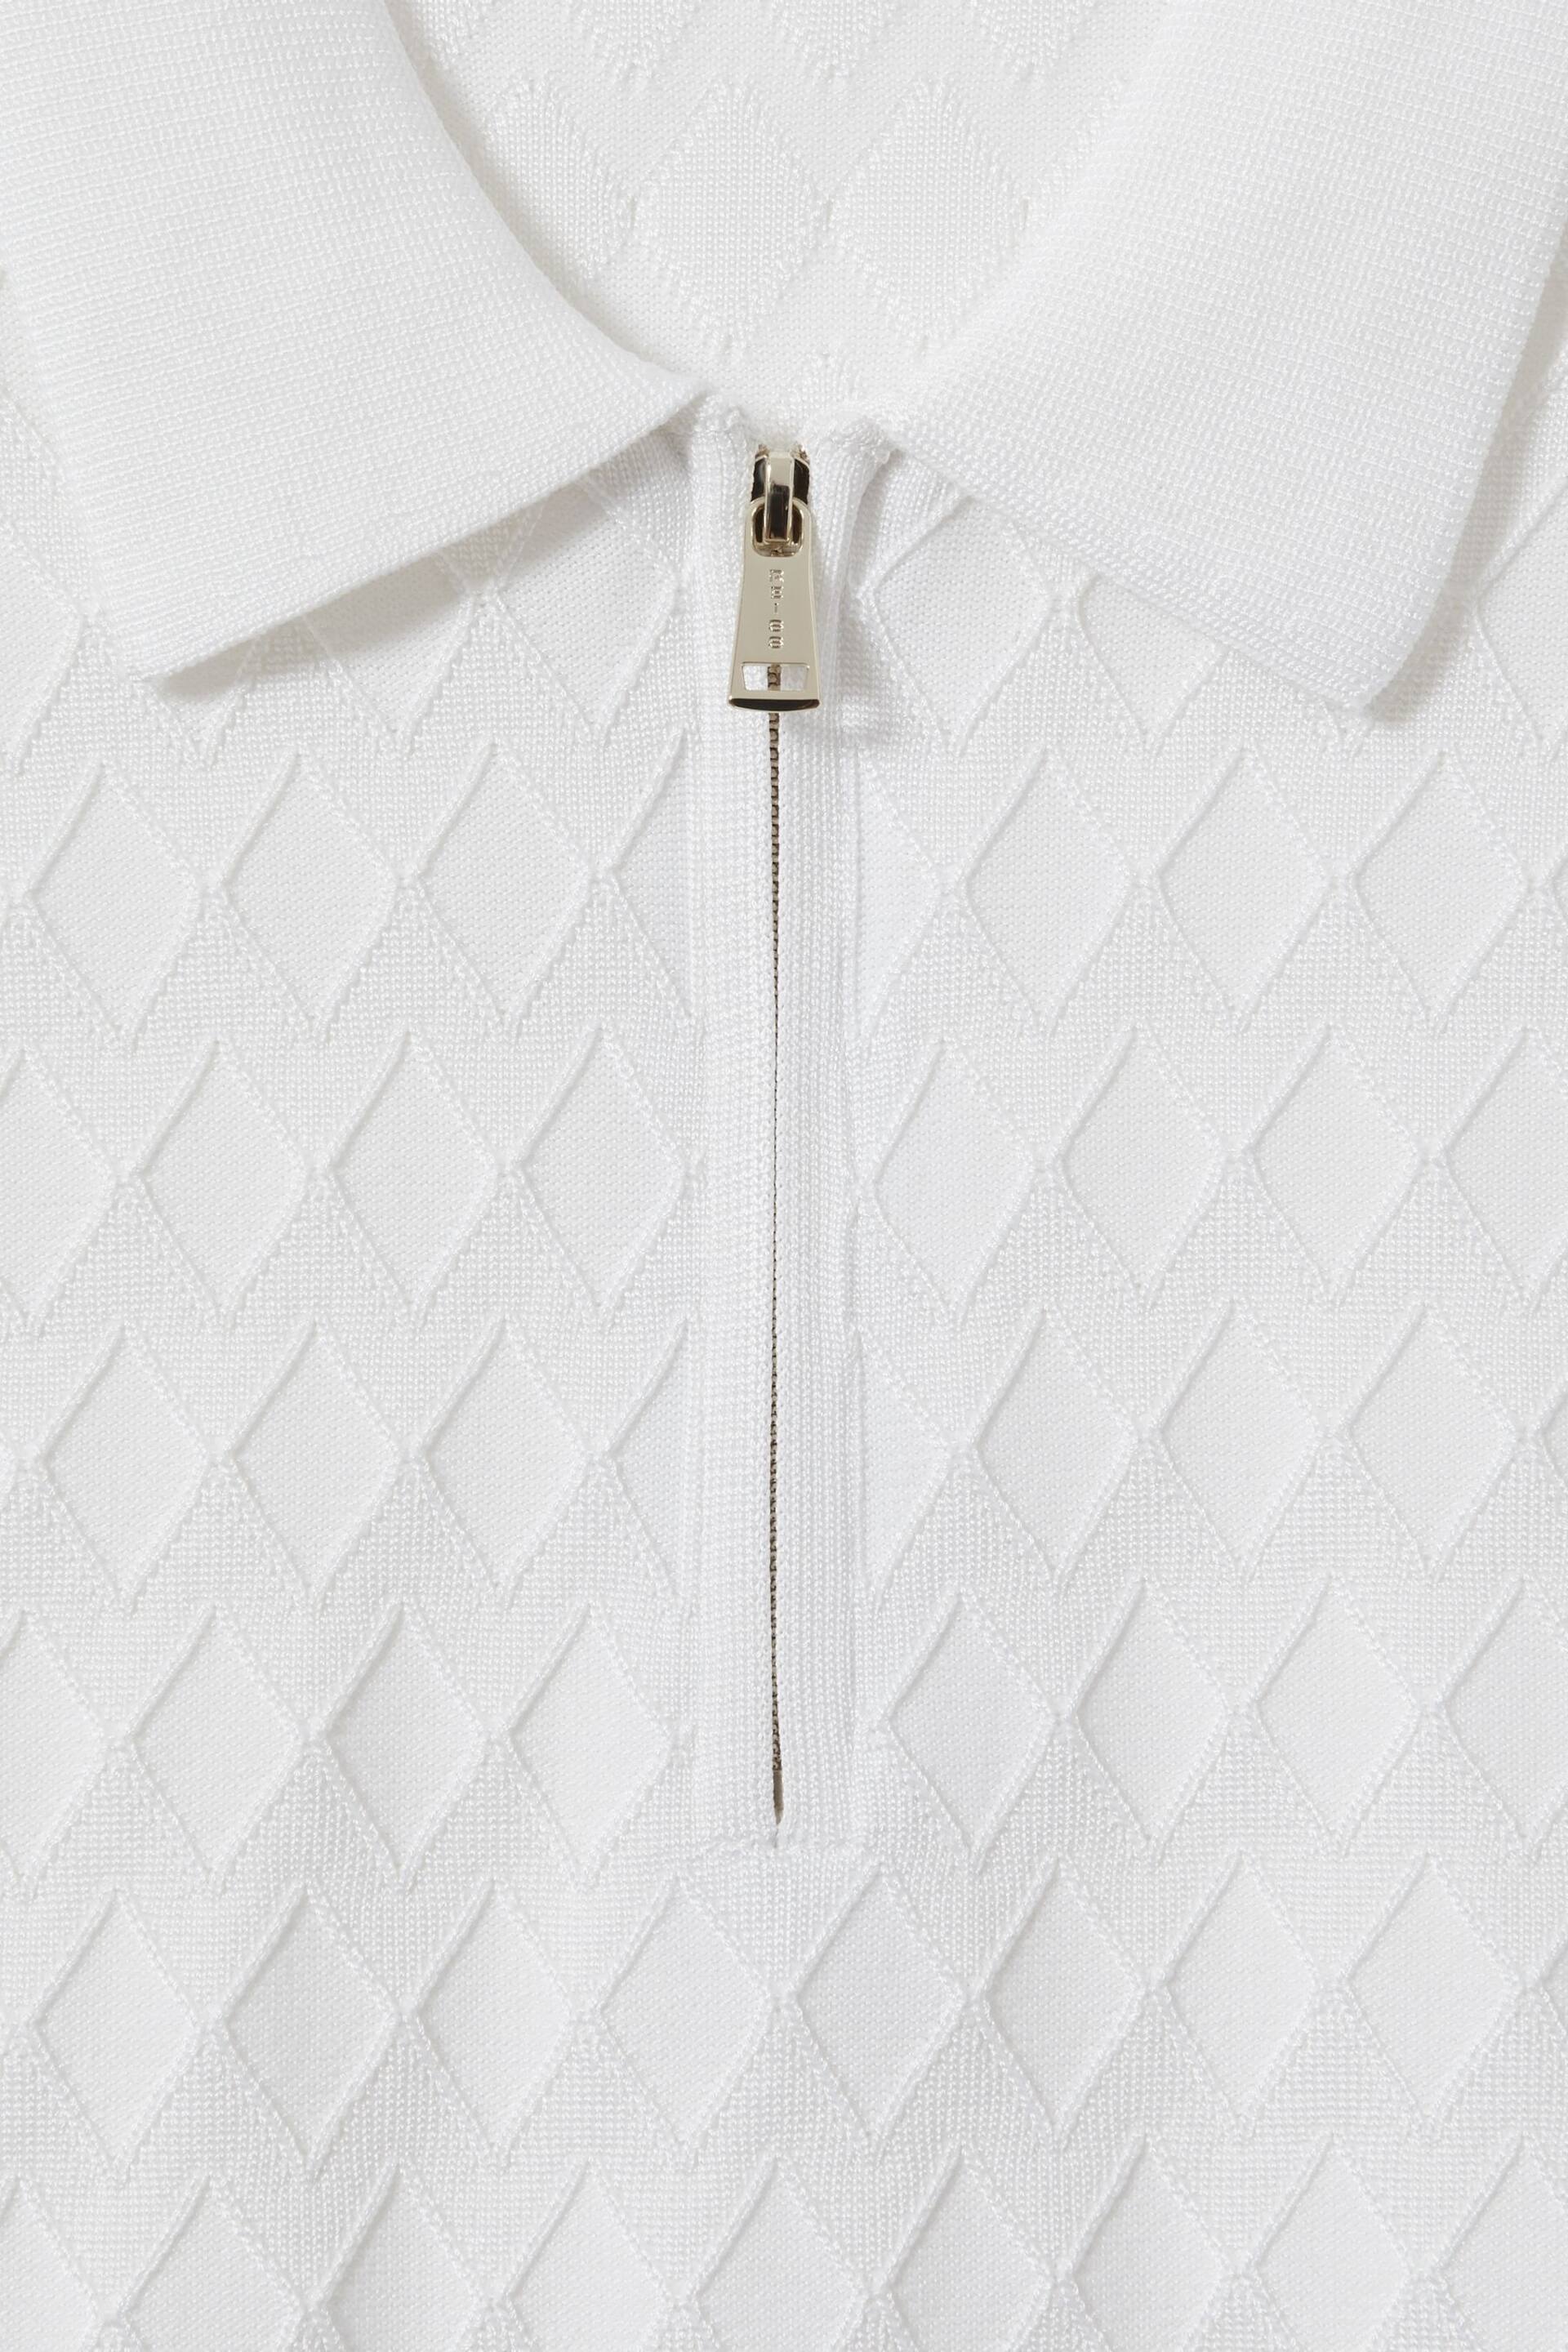 Reiss White Rizzo Half-Zip Knitted Polo Shirt - Image 5 of 5